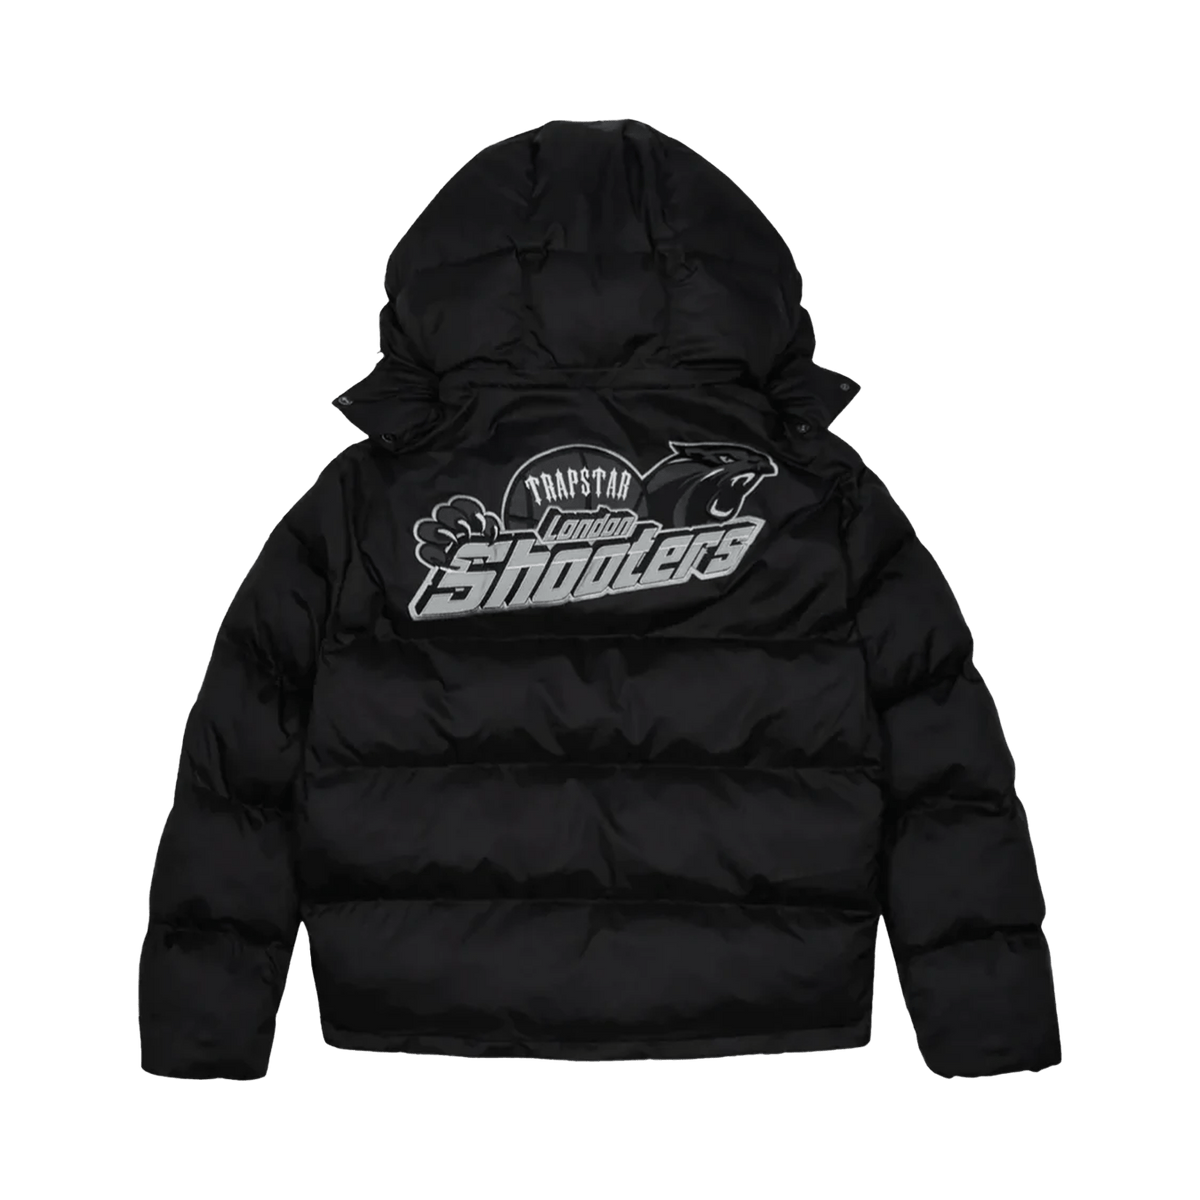 Trapstar Shooters Hooded Puffer Jacket - Black/Reflective - Kick Game